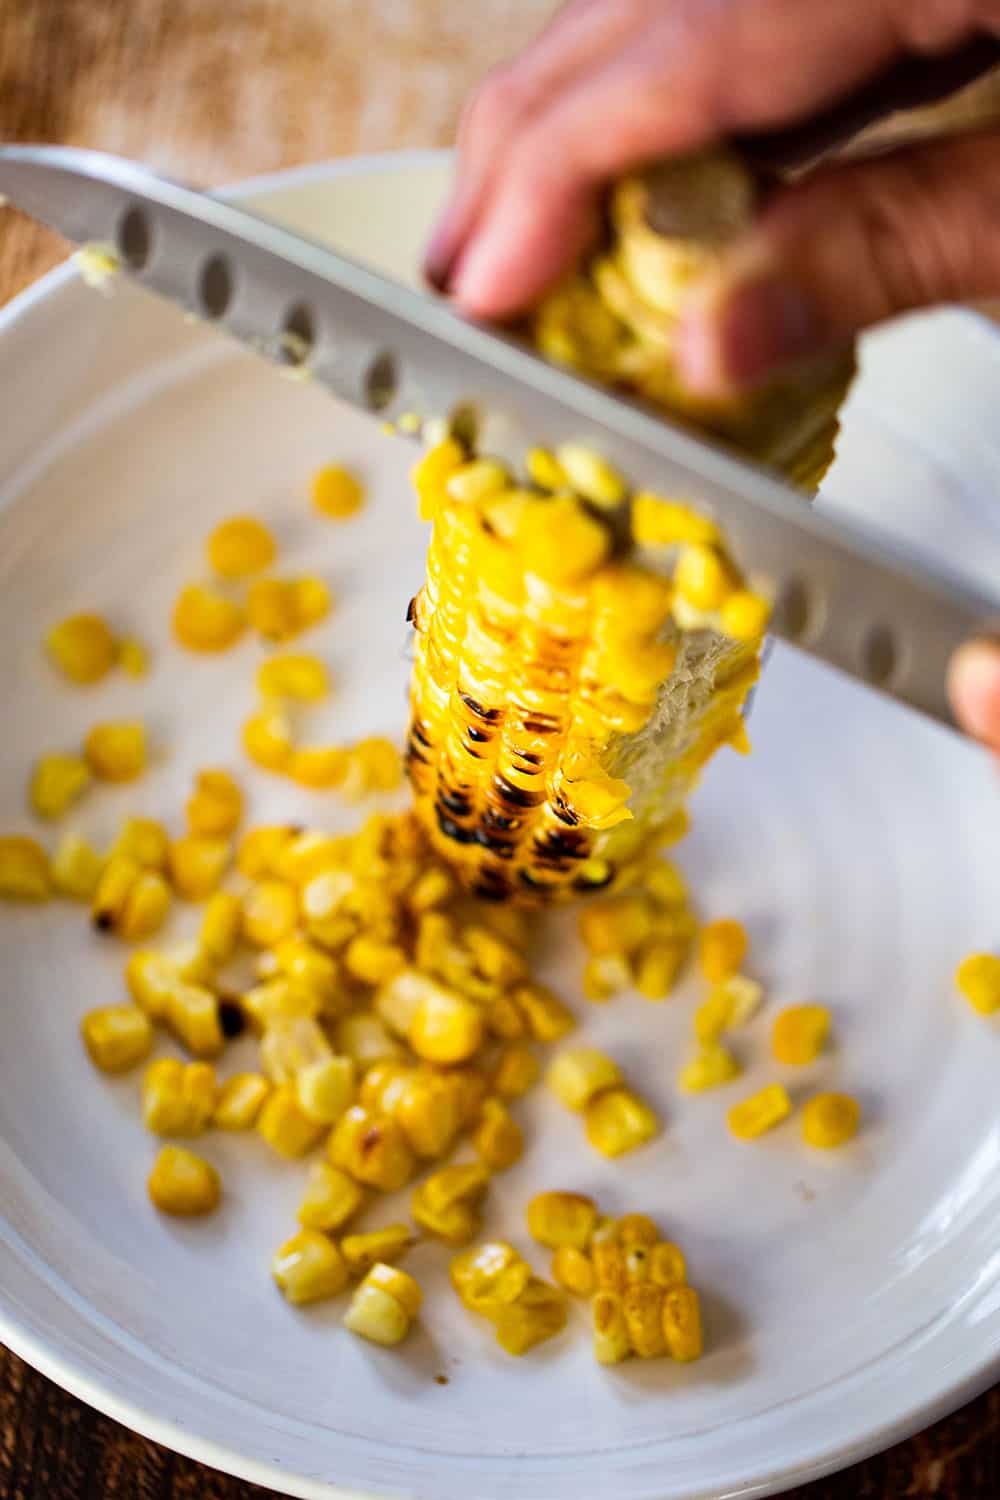 A person using a chef's knife to cut grilled corn kernels from an ear of a corn.